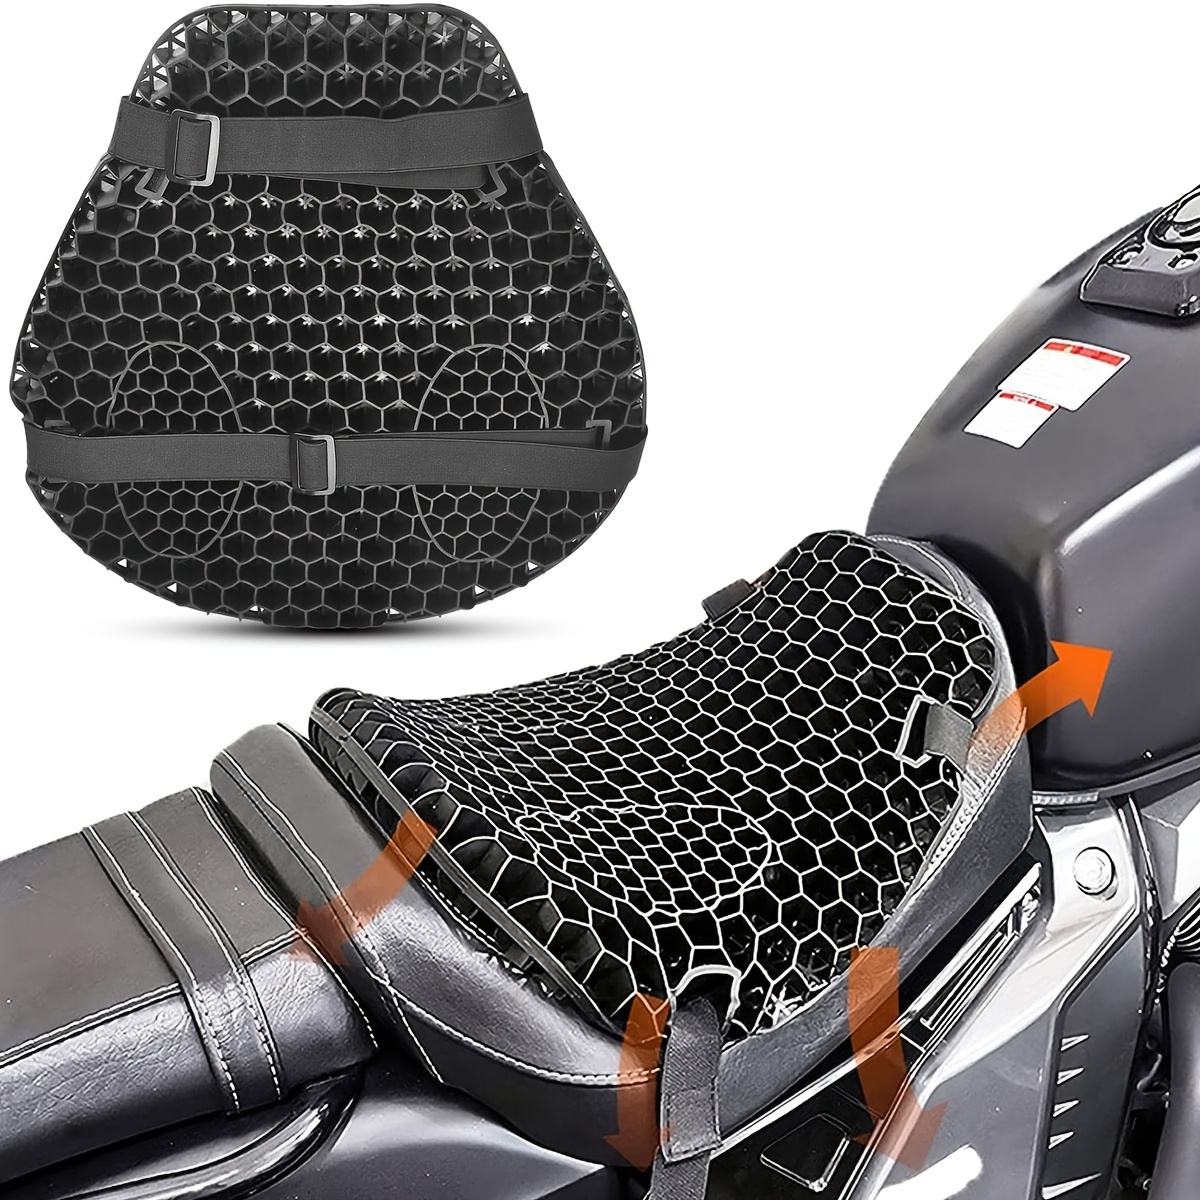 uywapvt Motorcycle Seat Cushion Gel Shock Absorption 3D Honeycomb Mesh  Breathable Motorbike Seat Pad Quick-Drying Protective Ride Saddle Seat  Cover